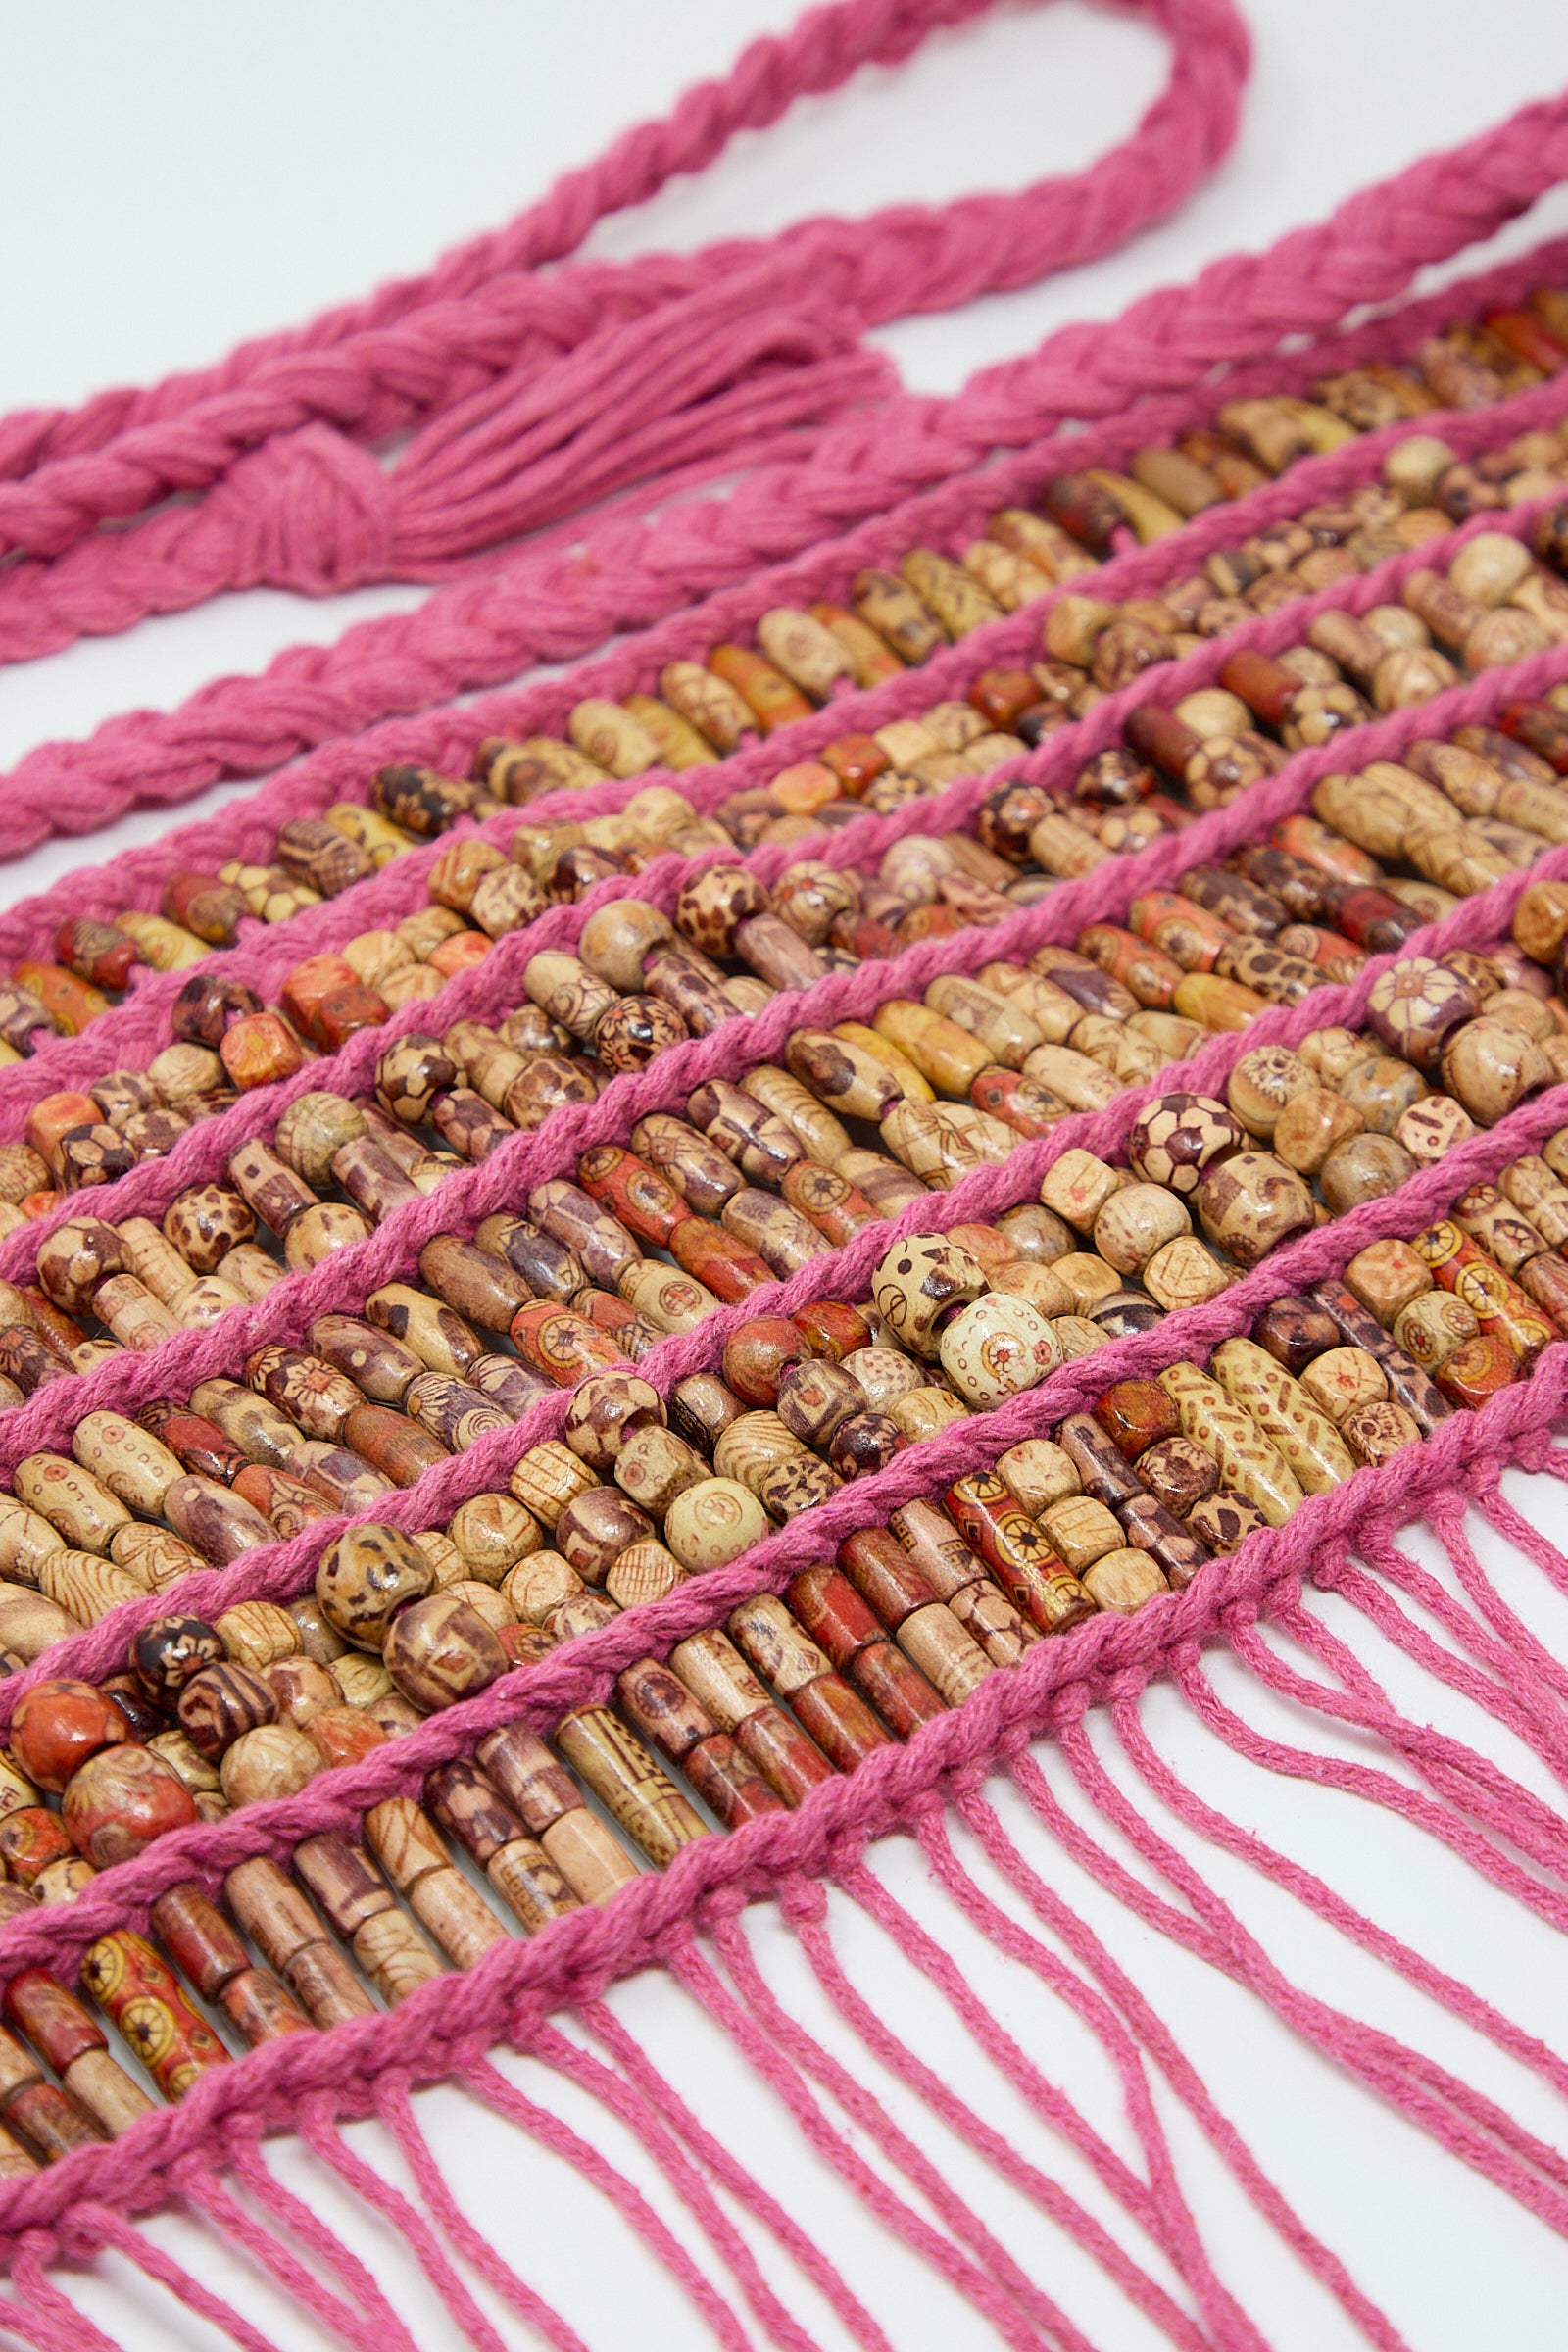 Colorful Luna Del Pinal beaded necklace with pink tassels on a white background, featuring wooden beads.